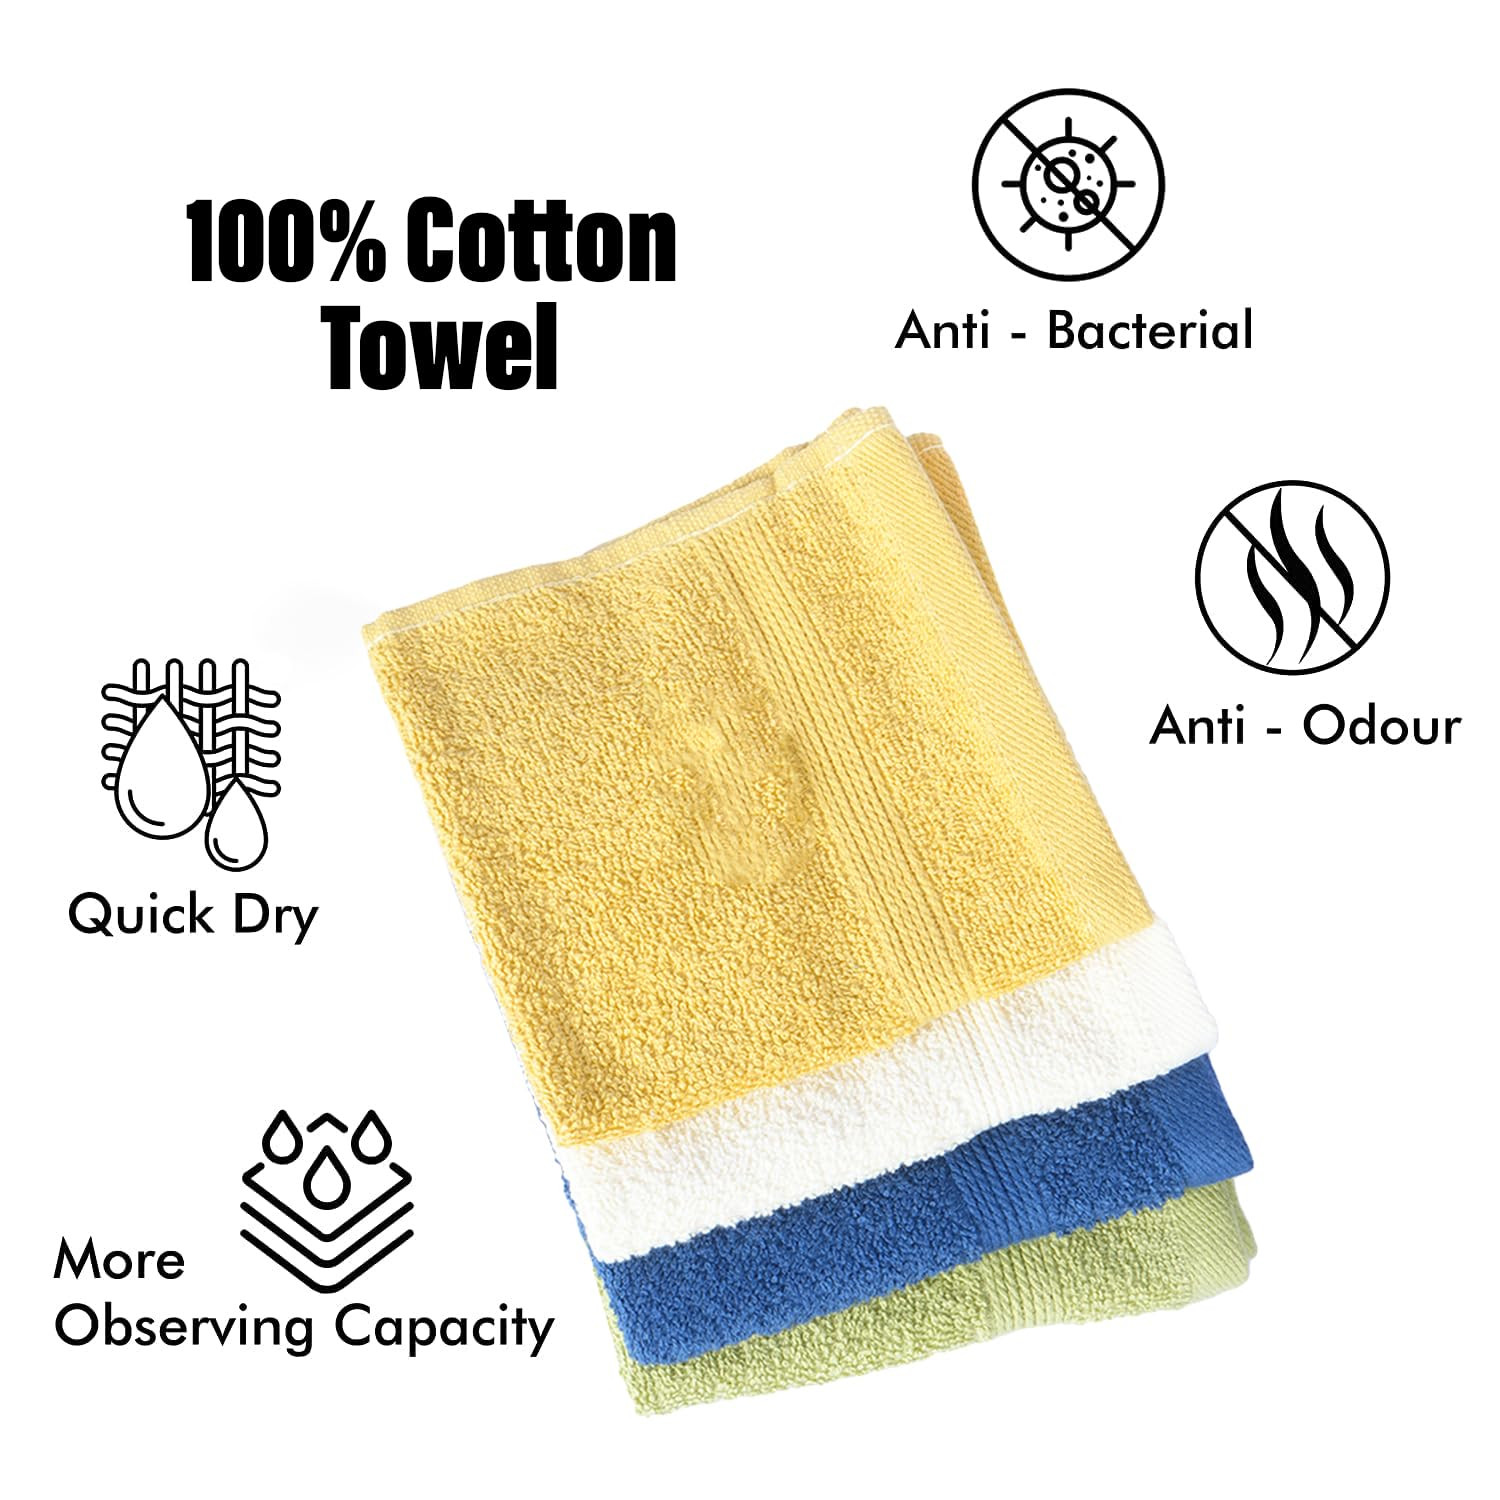 Kuber Industries 525 GSM Cotton Face towels |Super Soft, Quick Absorbent & Anti-Bacterial|Gym & Workout Towels|Pack of 4 (Multicolor)